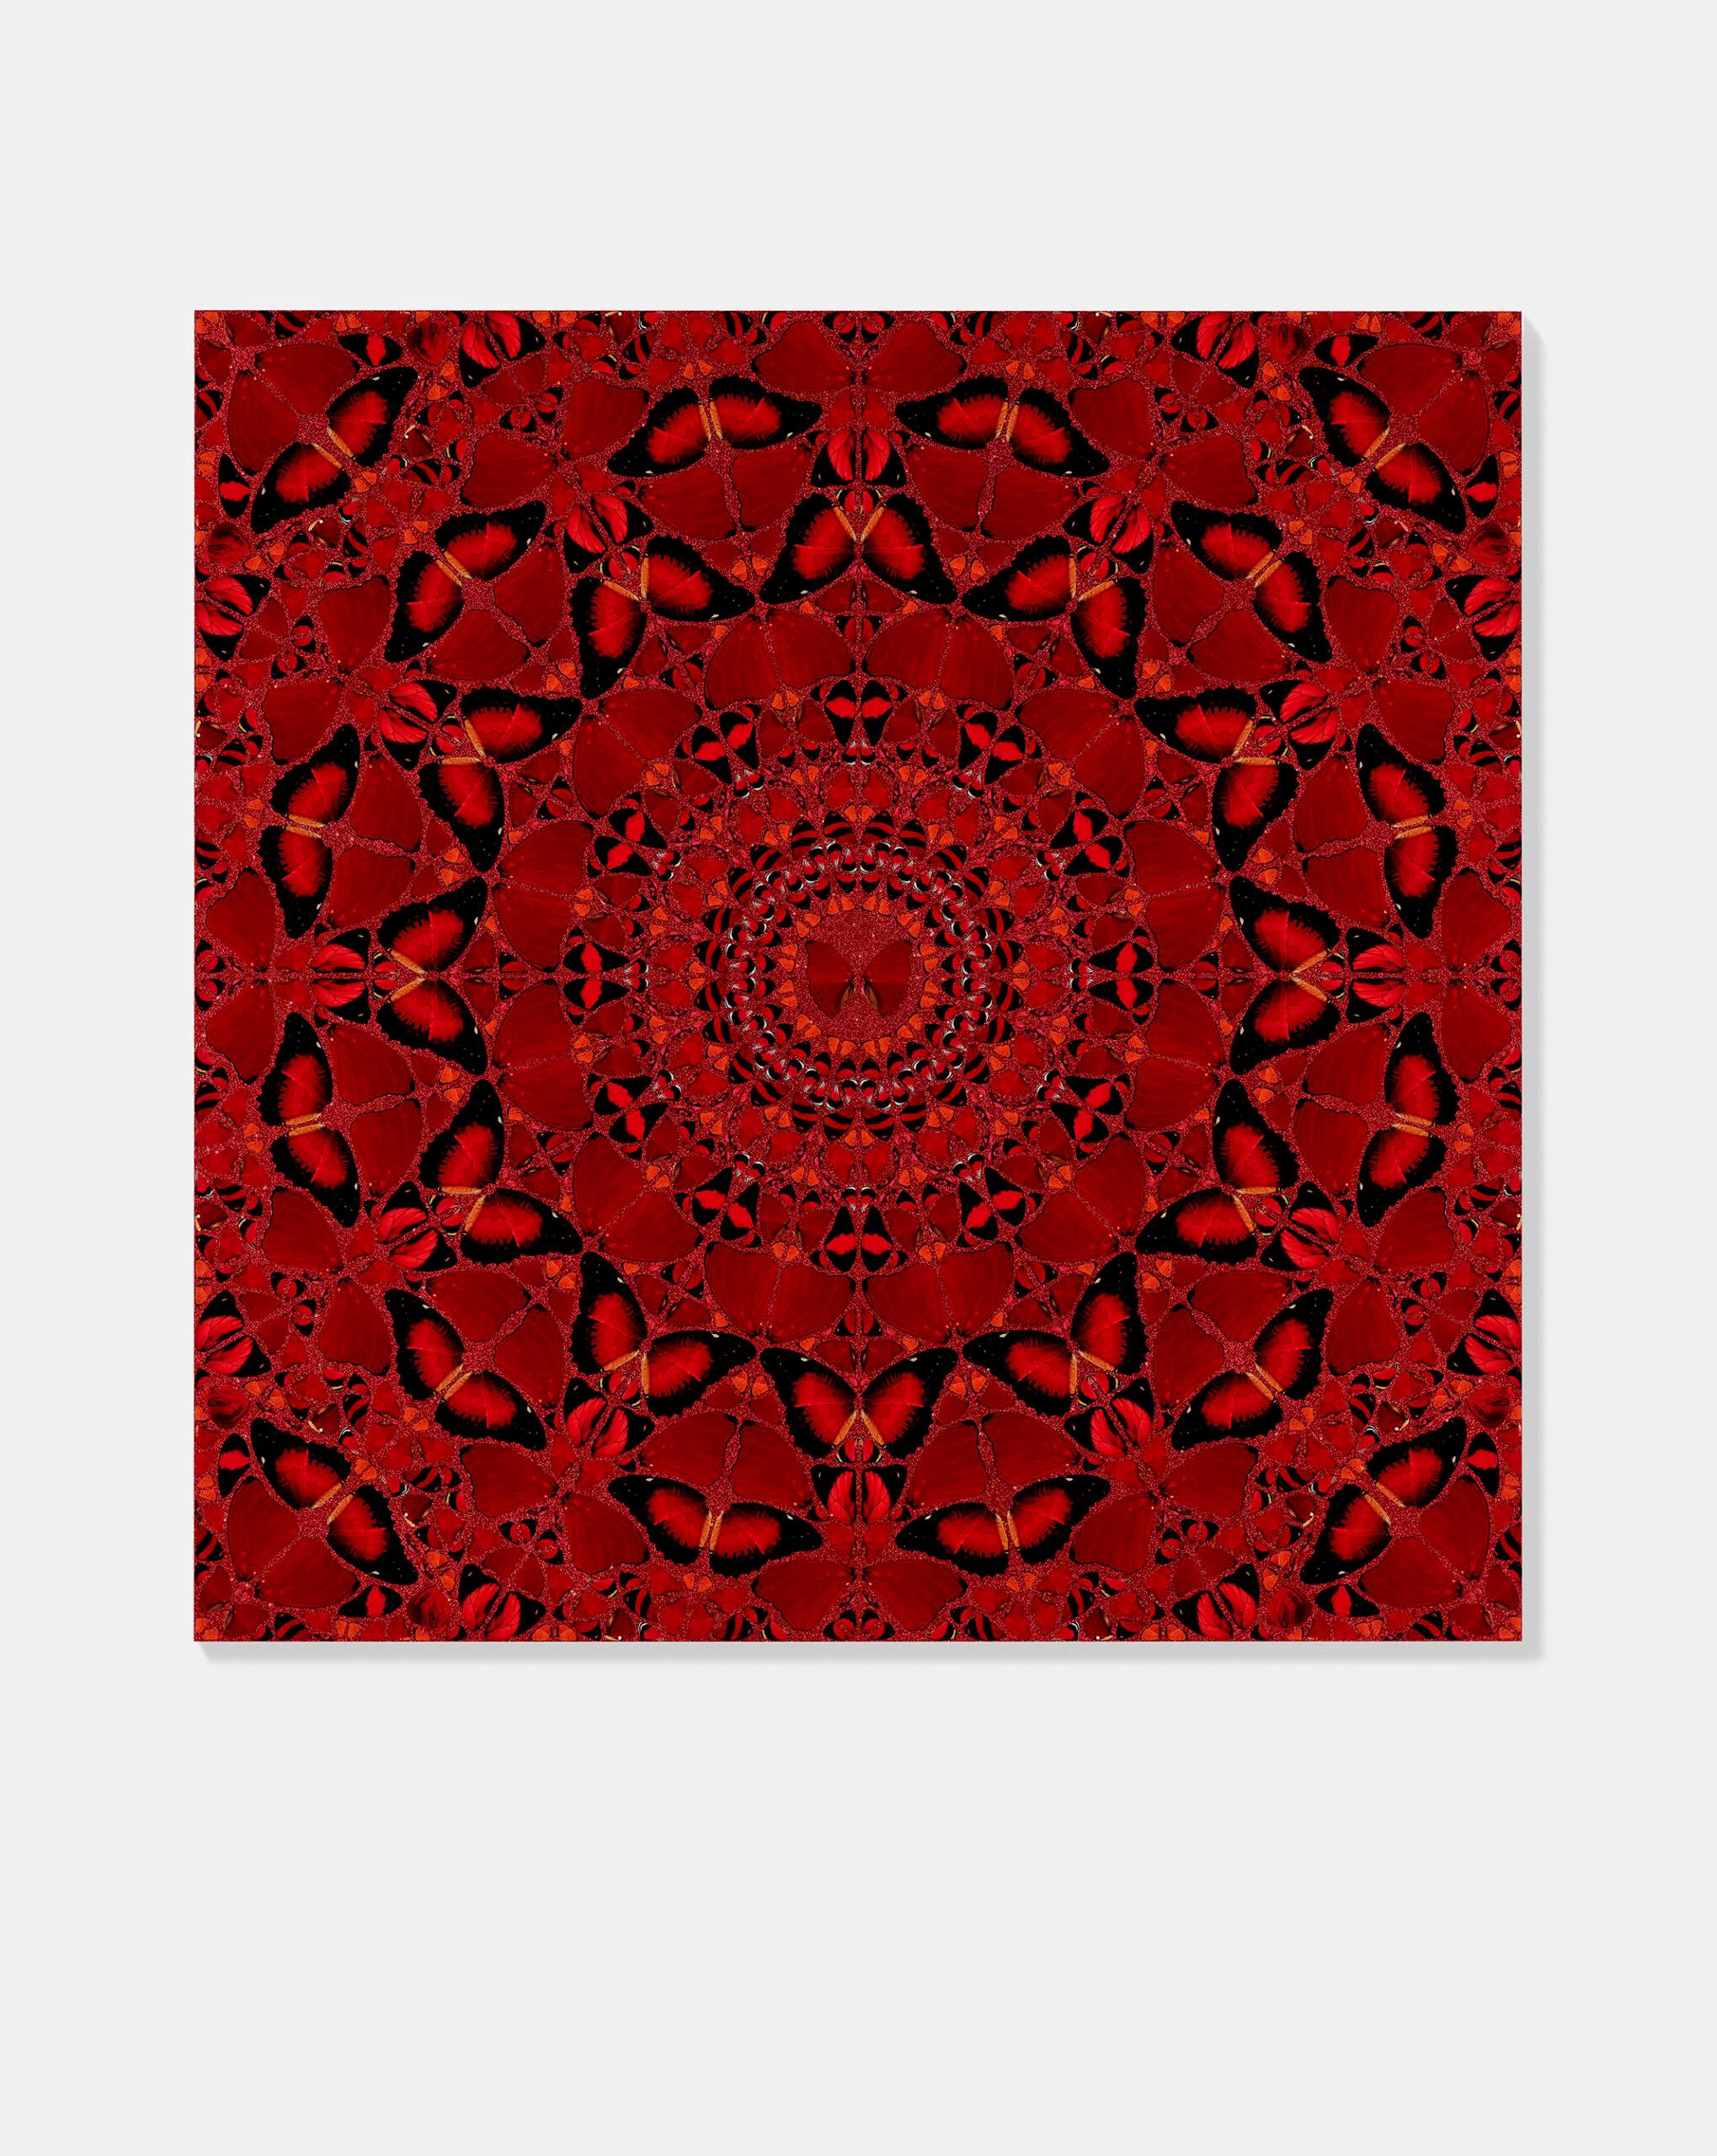 Suiko by Damien Hirst, The Empresses, Red Butterflies kaleidoscope effect For Sale 1